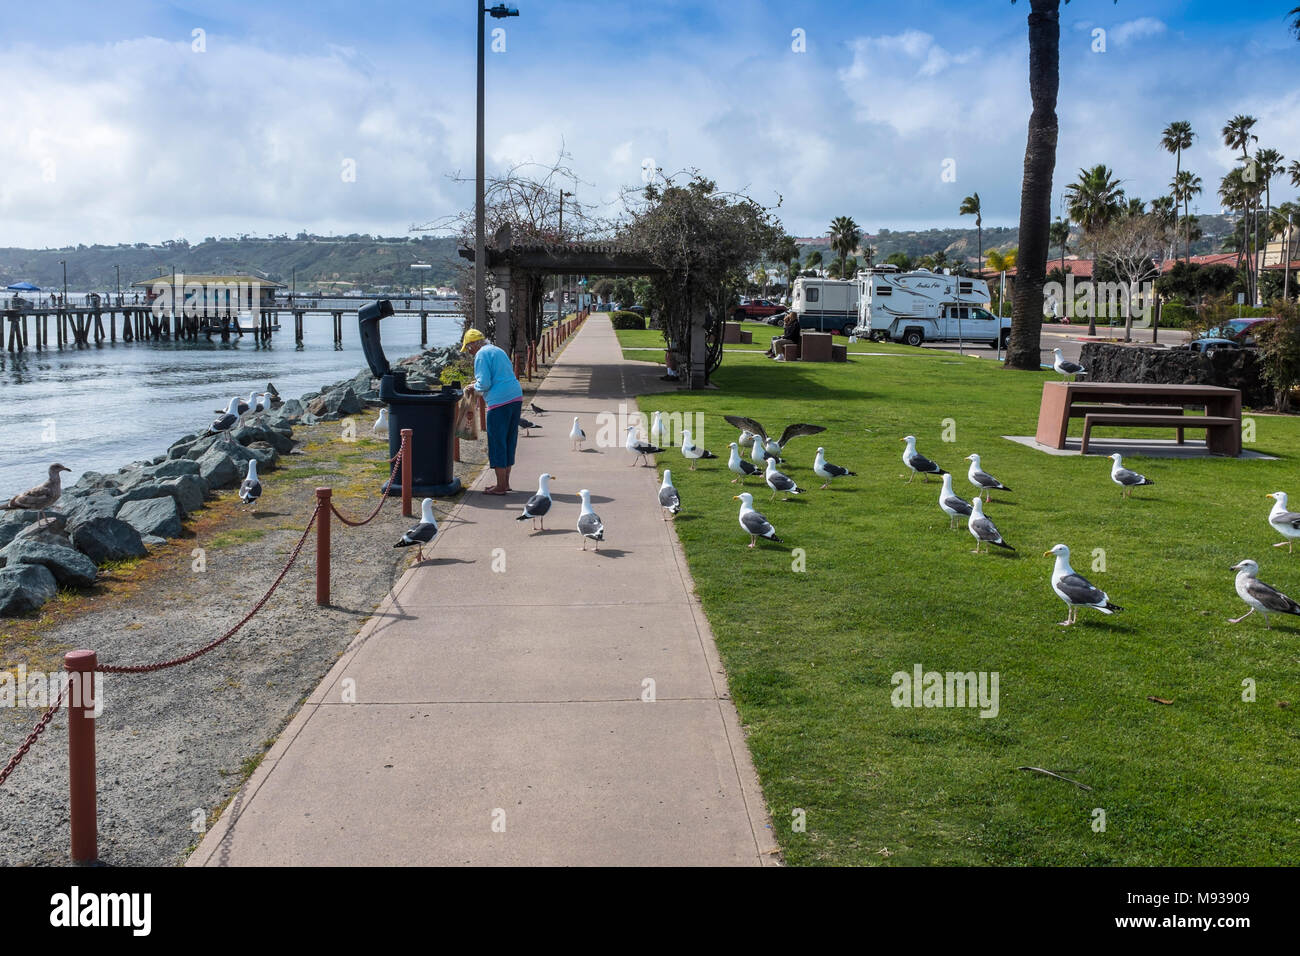 SAN DIEGO, CALIFORNIA, USA - Seagulls feeding on the waterfront at Shelter Island in San Diego. Stock Photo